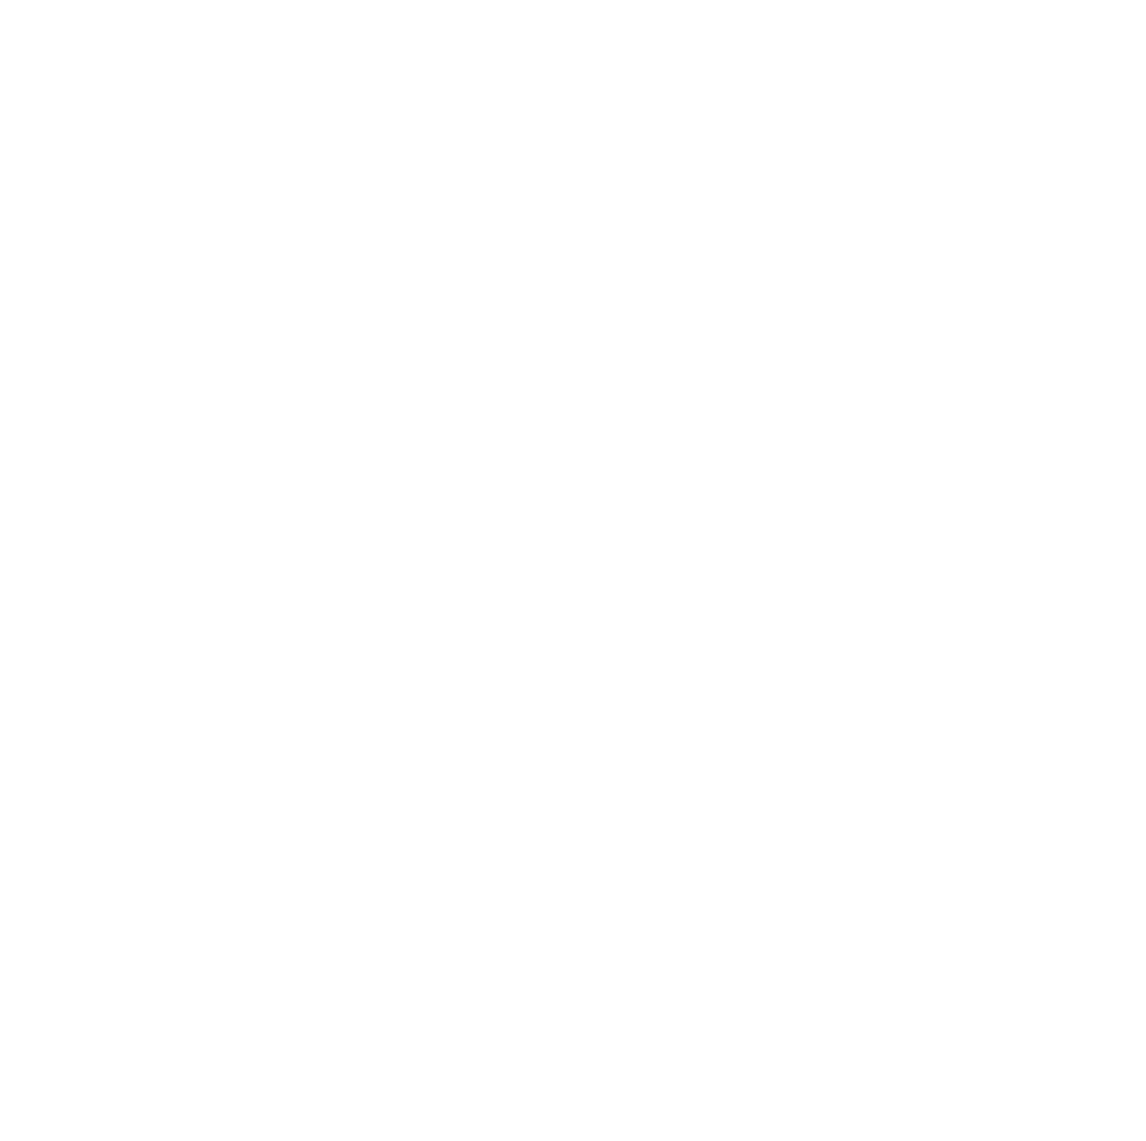 A white logo for Soqual Creative Agency on a transparent background.